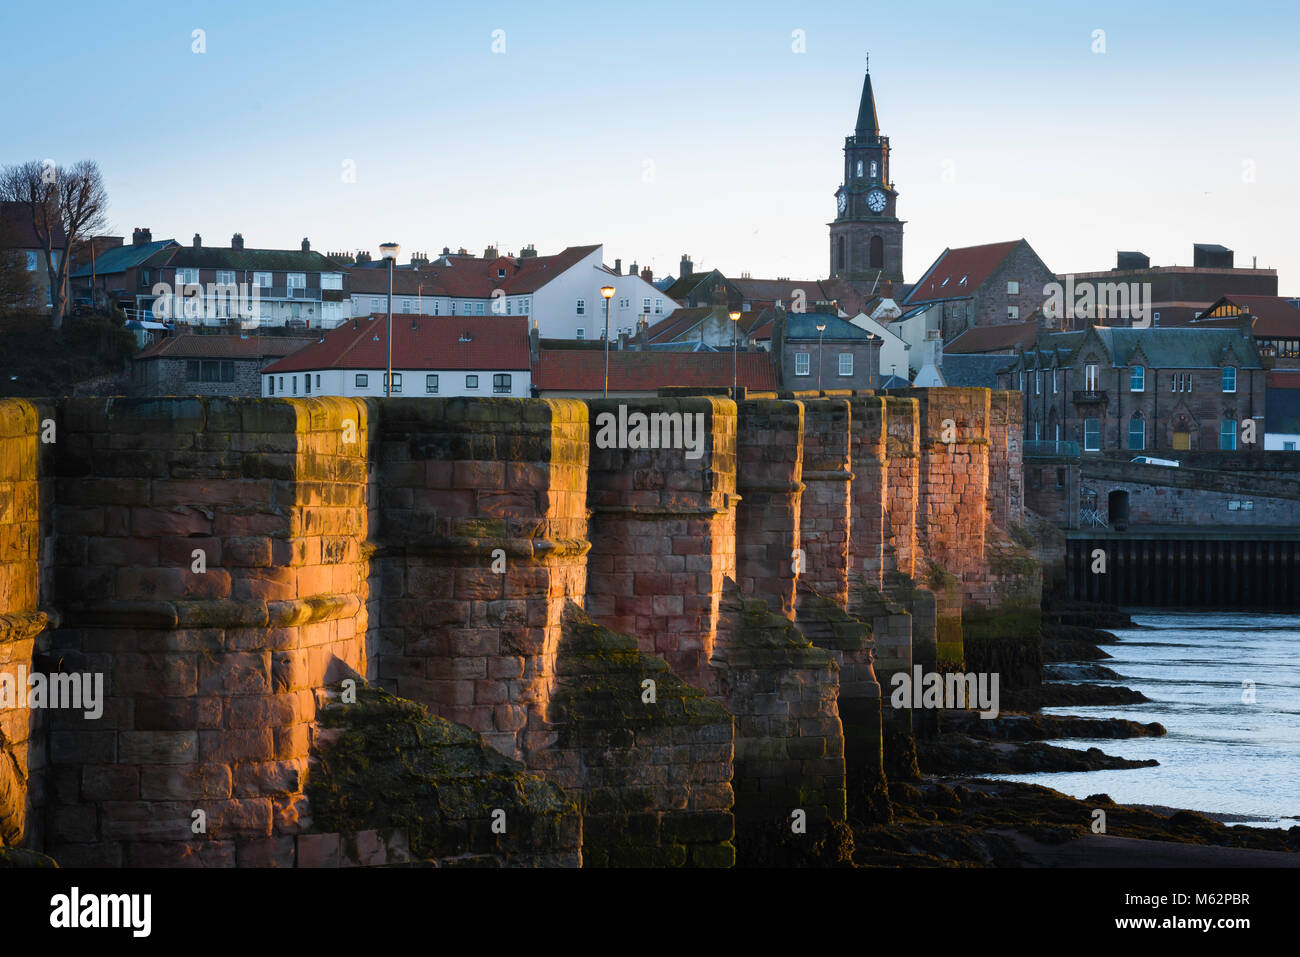 Old Bridge UK, view at sunrise of the old 17th Century bridge across the Tweed leading to the town of Berwick upon Tweed, Northumberland, England Stock Photo